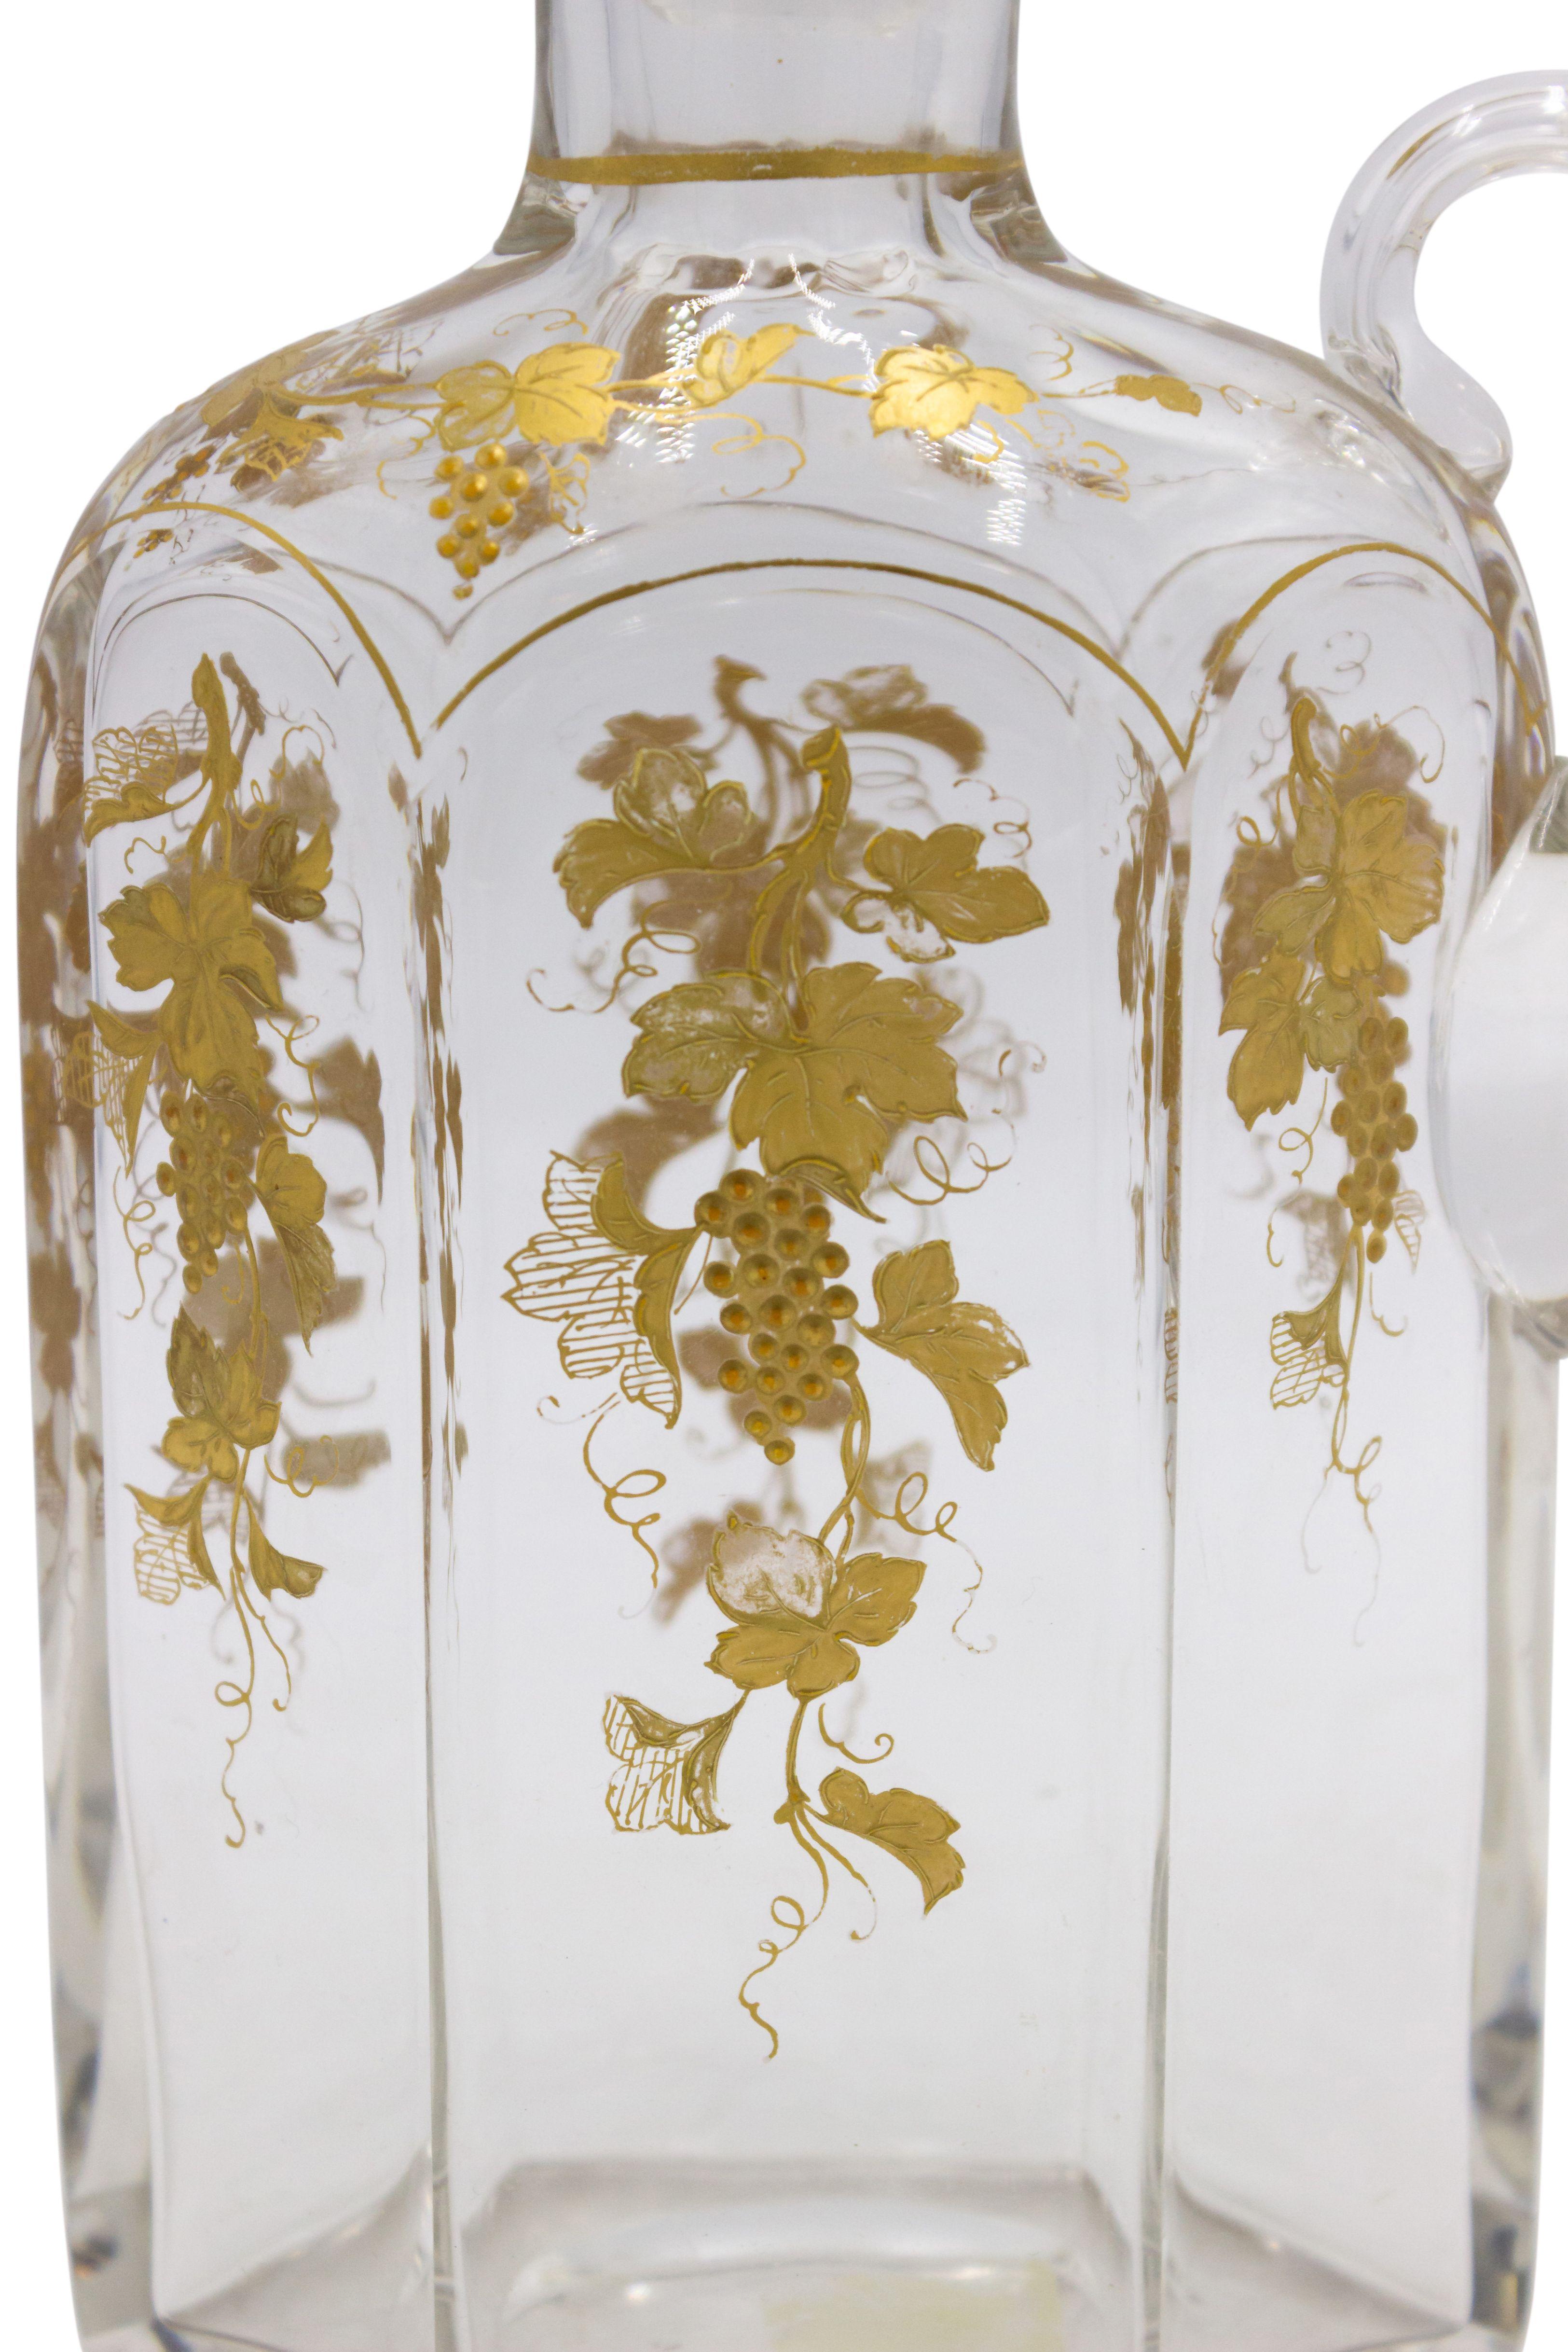 French Victorian crystal decanter with gold floral decoration and a small handle.